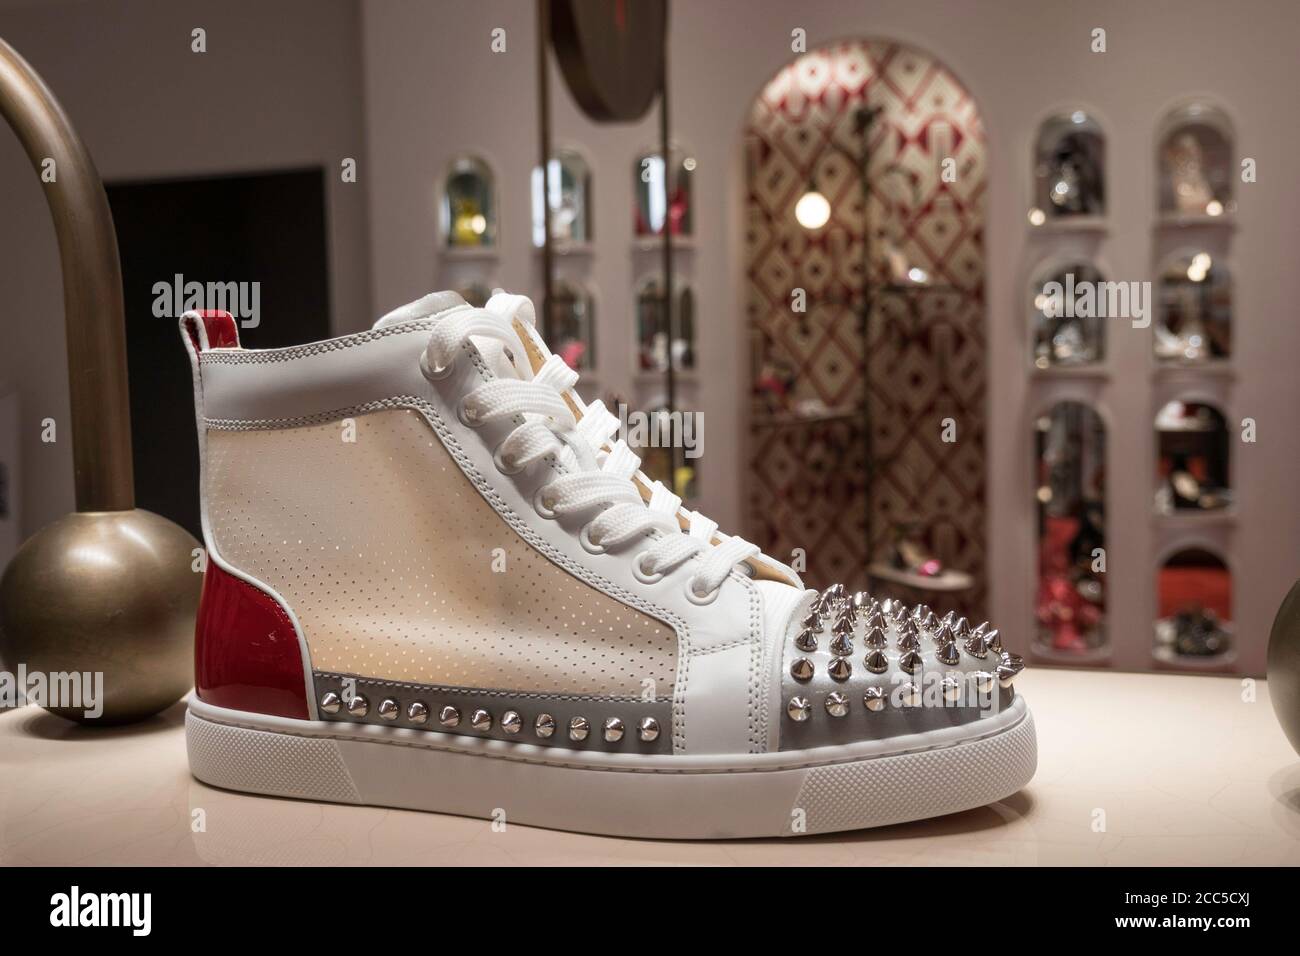 A Look at Christian Louboutin's New Boutique in Houston – Footwear News